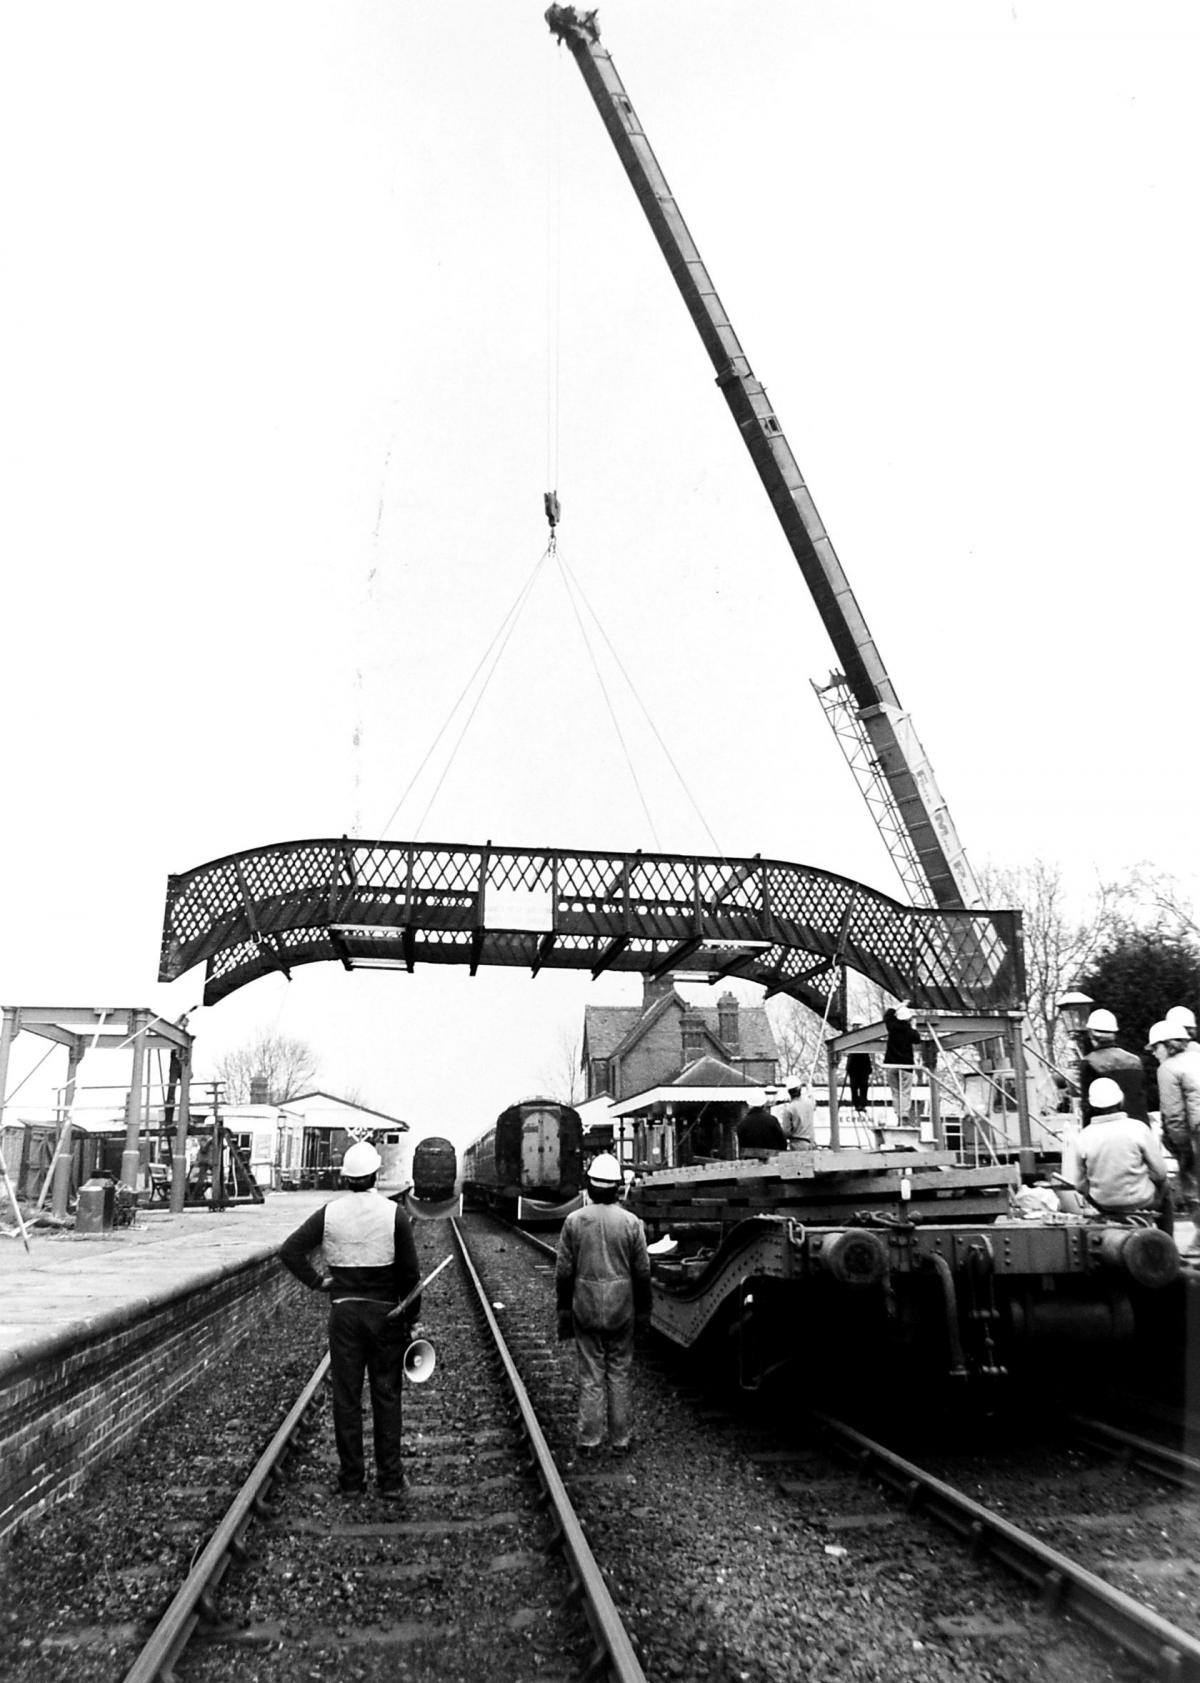 A new bridge lowered into place at Sheffield Park Station 1985. (LB-1174)